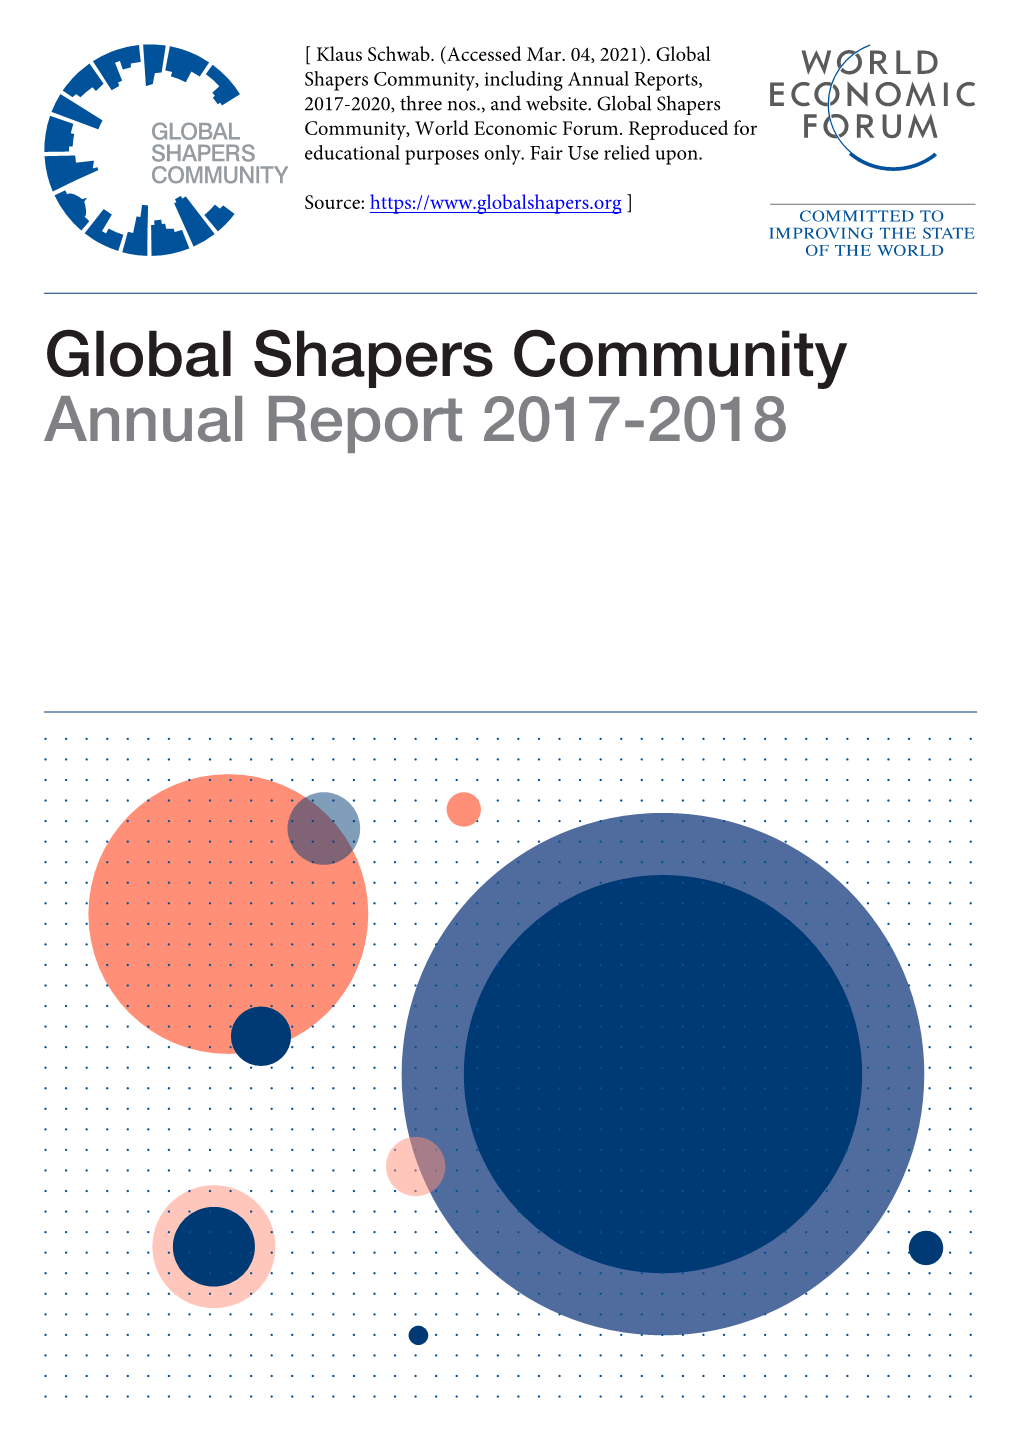 Global Shapers Community Annual Report 2017-2018